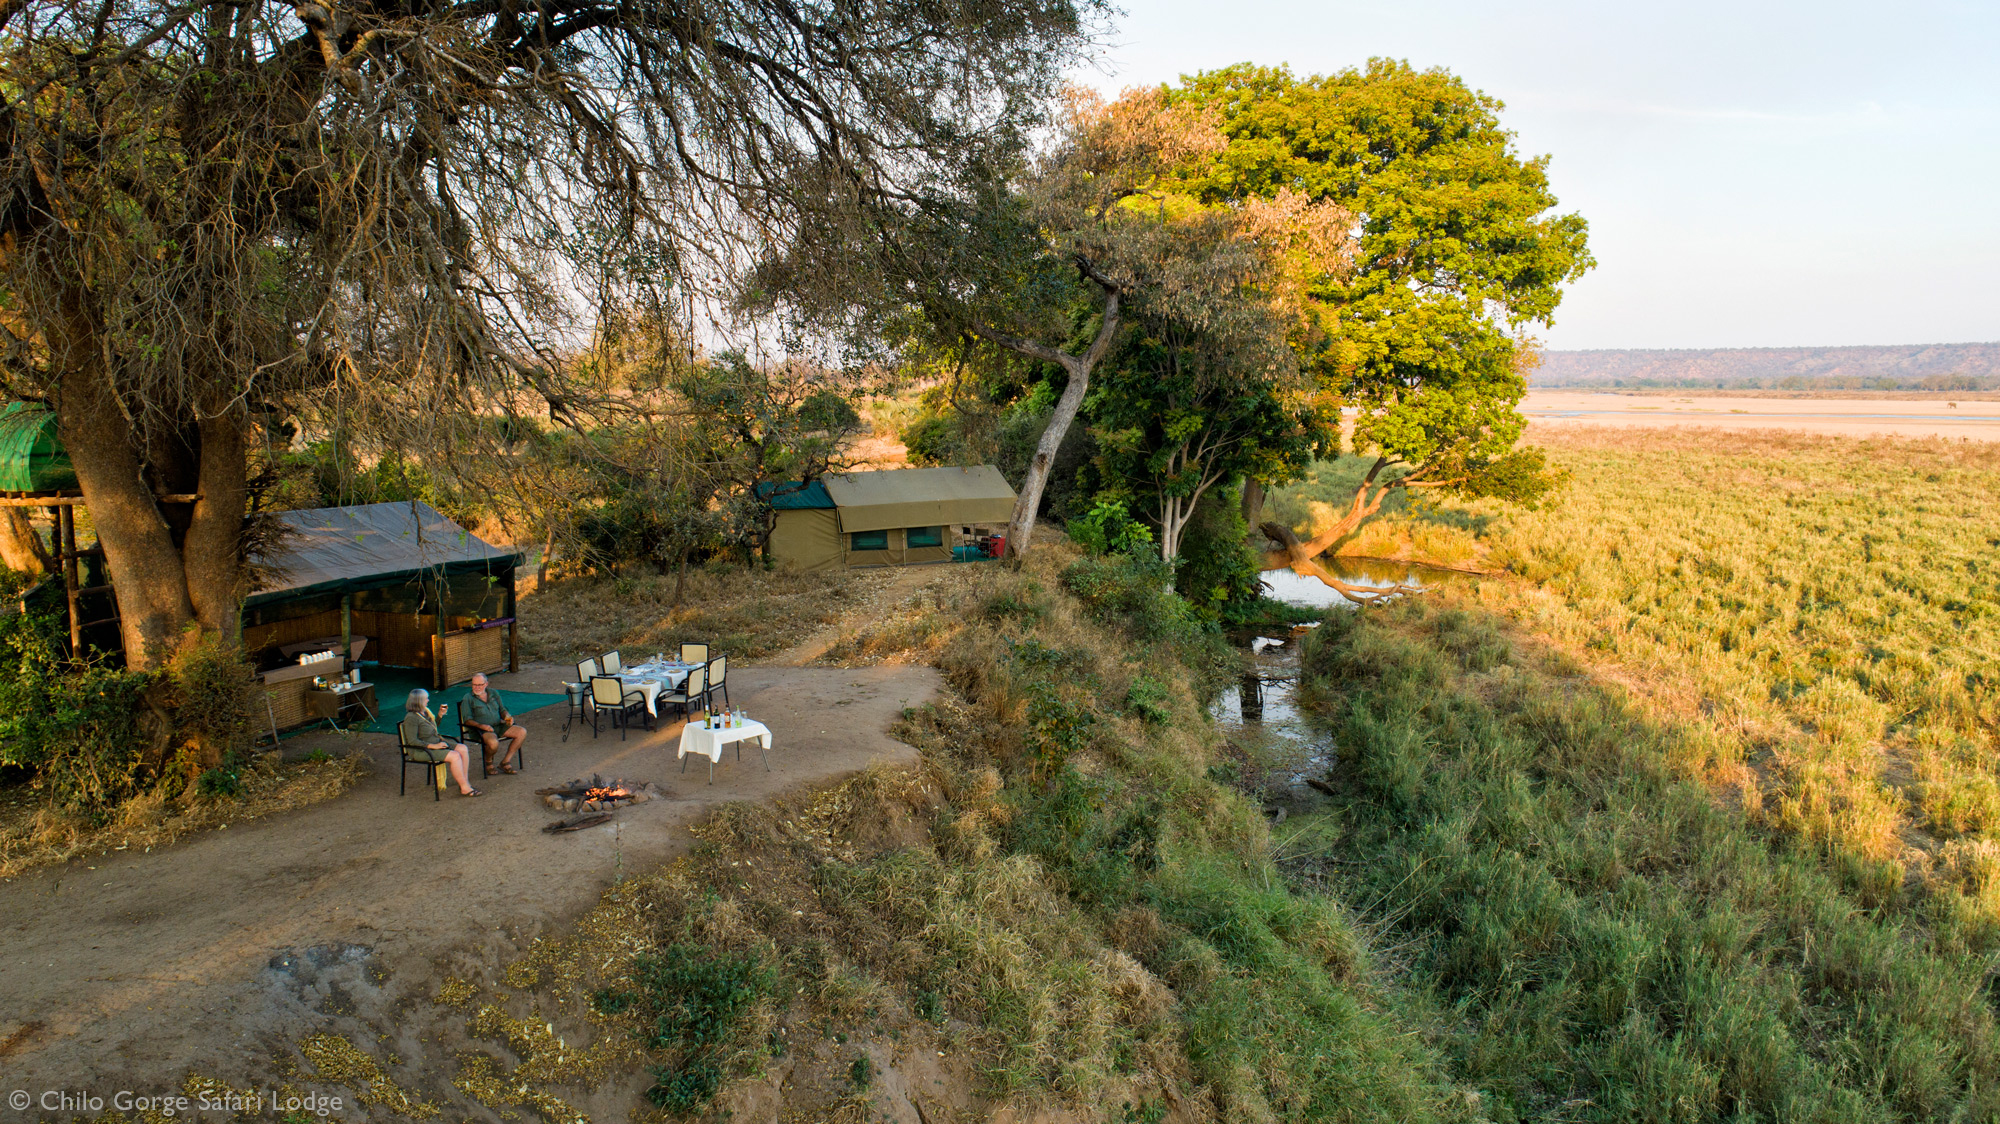 Chilo Gorge Tented Camp aerial view